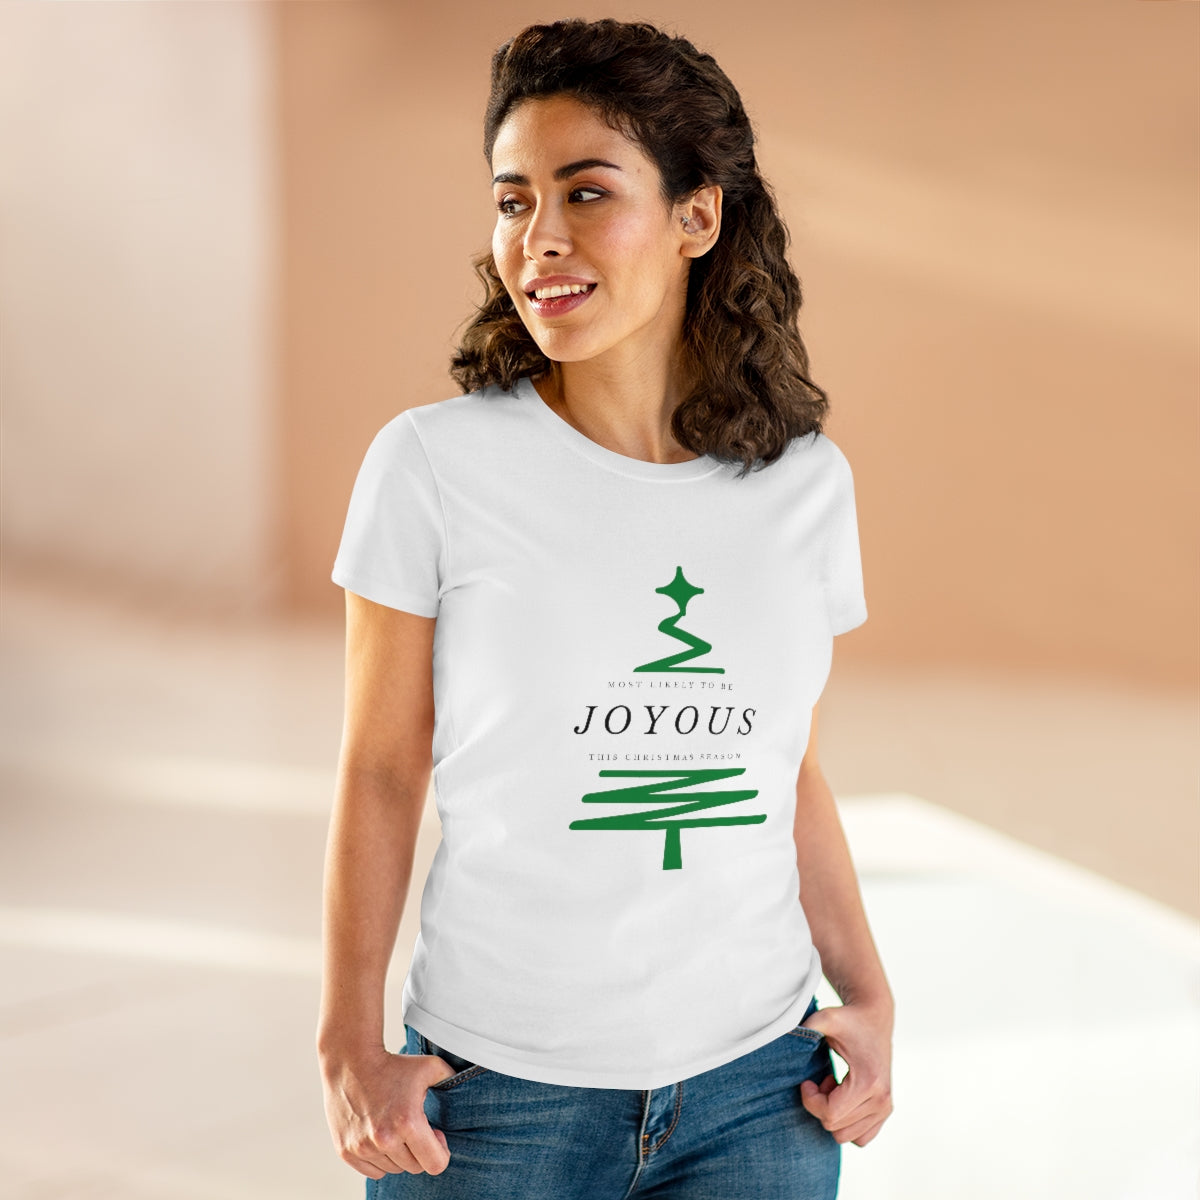 Most Likely to Be Joyous - Christmas Tee